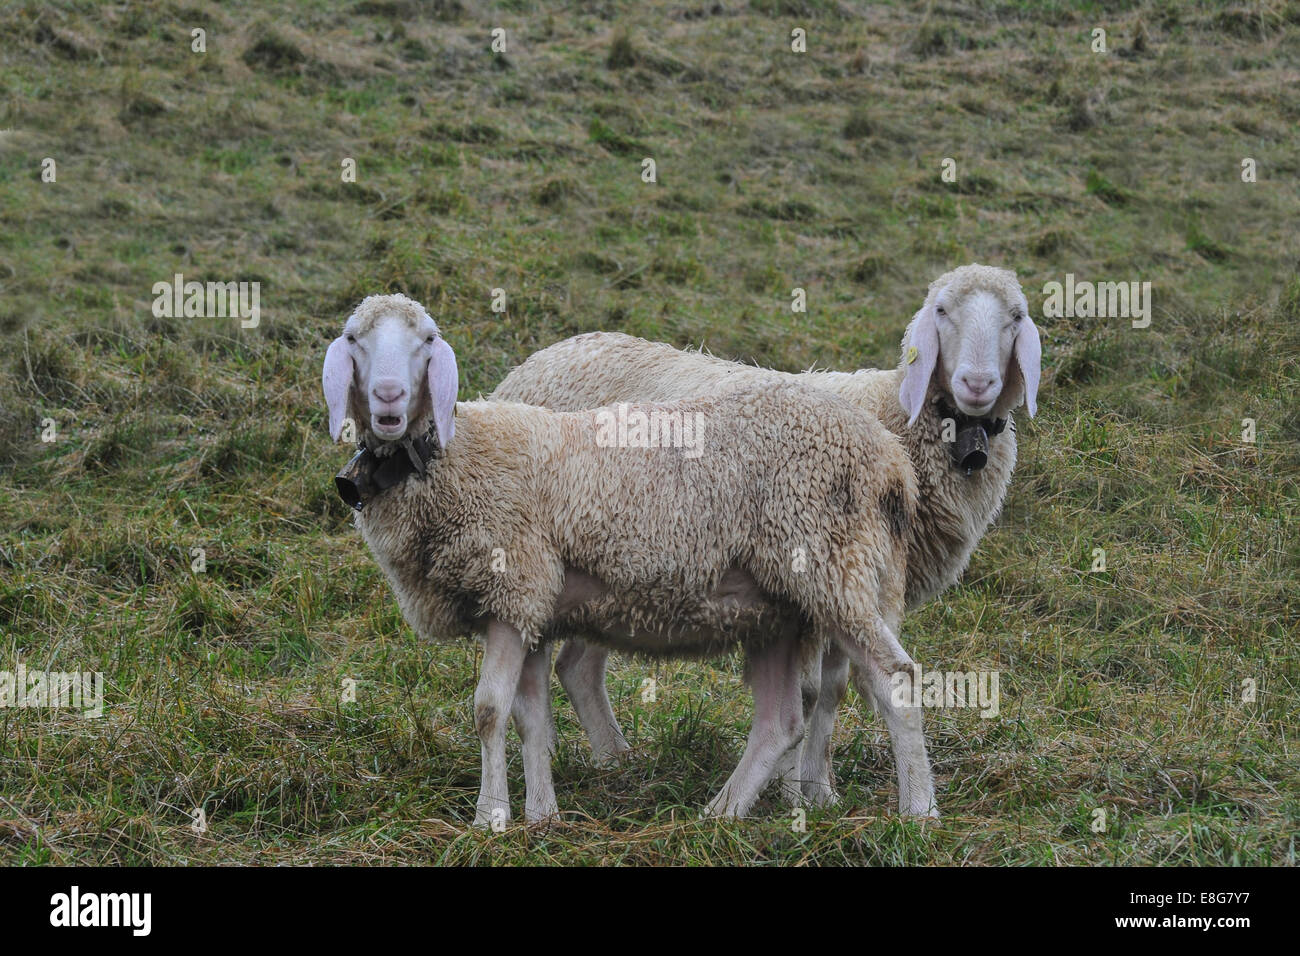 Two sheep look at the camera, one with an open mouthed expression Stock Photo